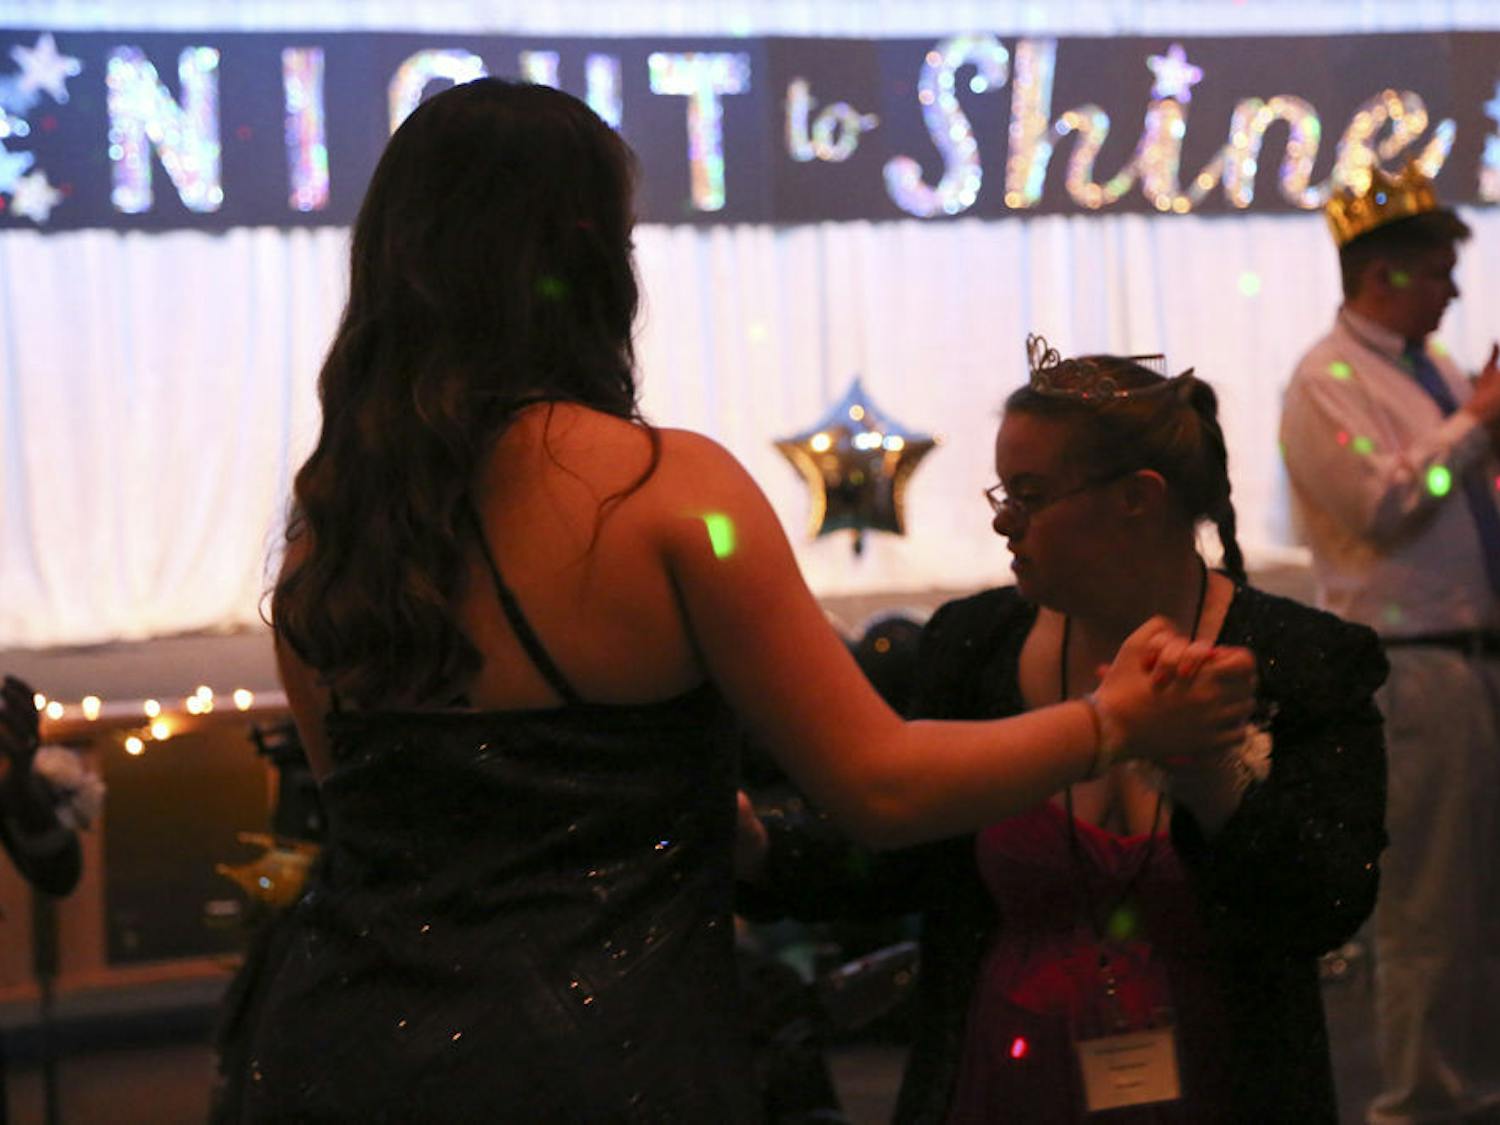 Lexie Matheo, a UF health science freshman, dances with Rosemary, 19, at Night to Shine. Matheo was Rosemary’s buddy, accompanying her the entire night. “It is almost like you're not even volunteering,” Matheo said. “It’s so fulfilling.”